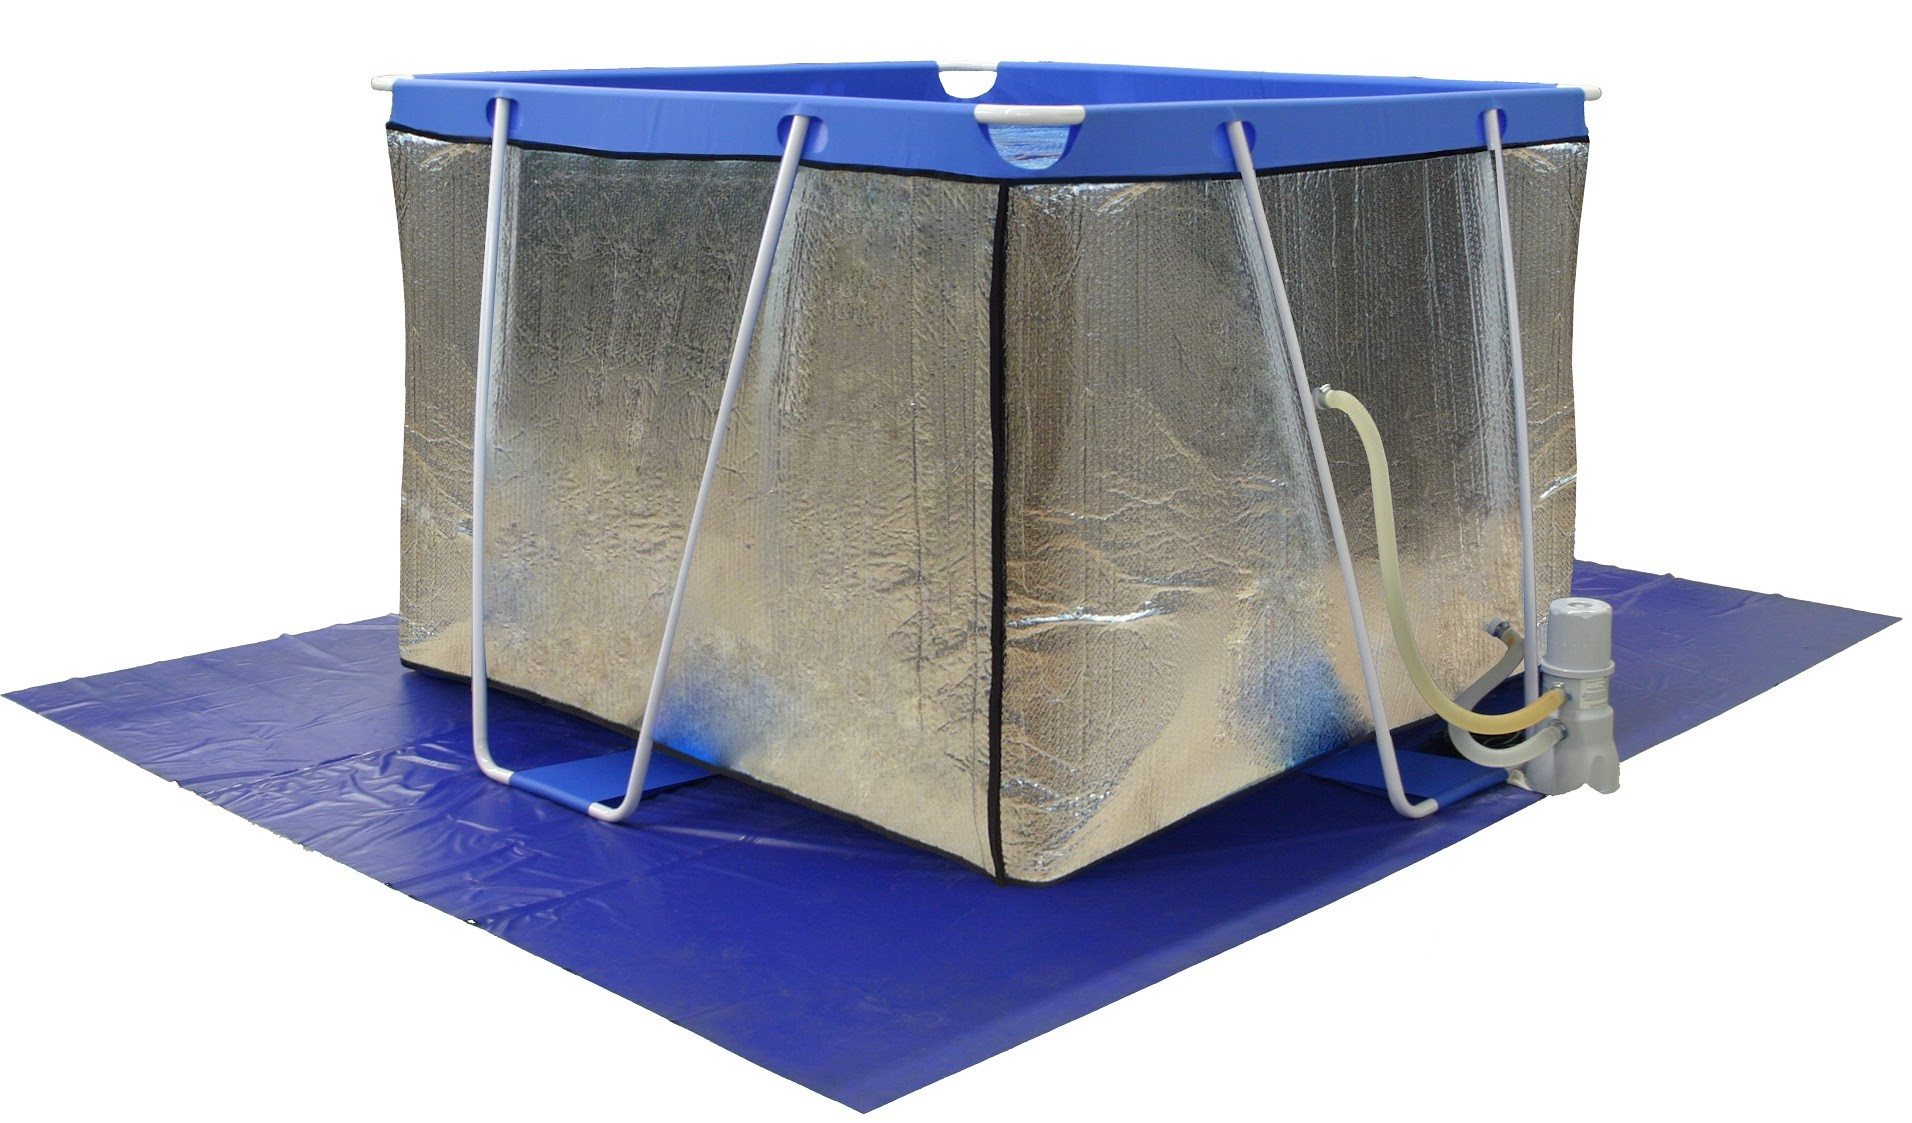 Above Ground Therapy Pool Insulation For Sale Online